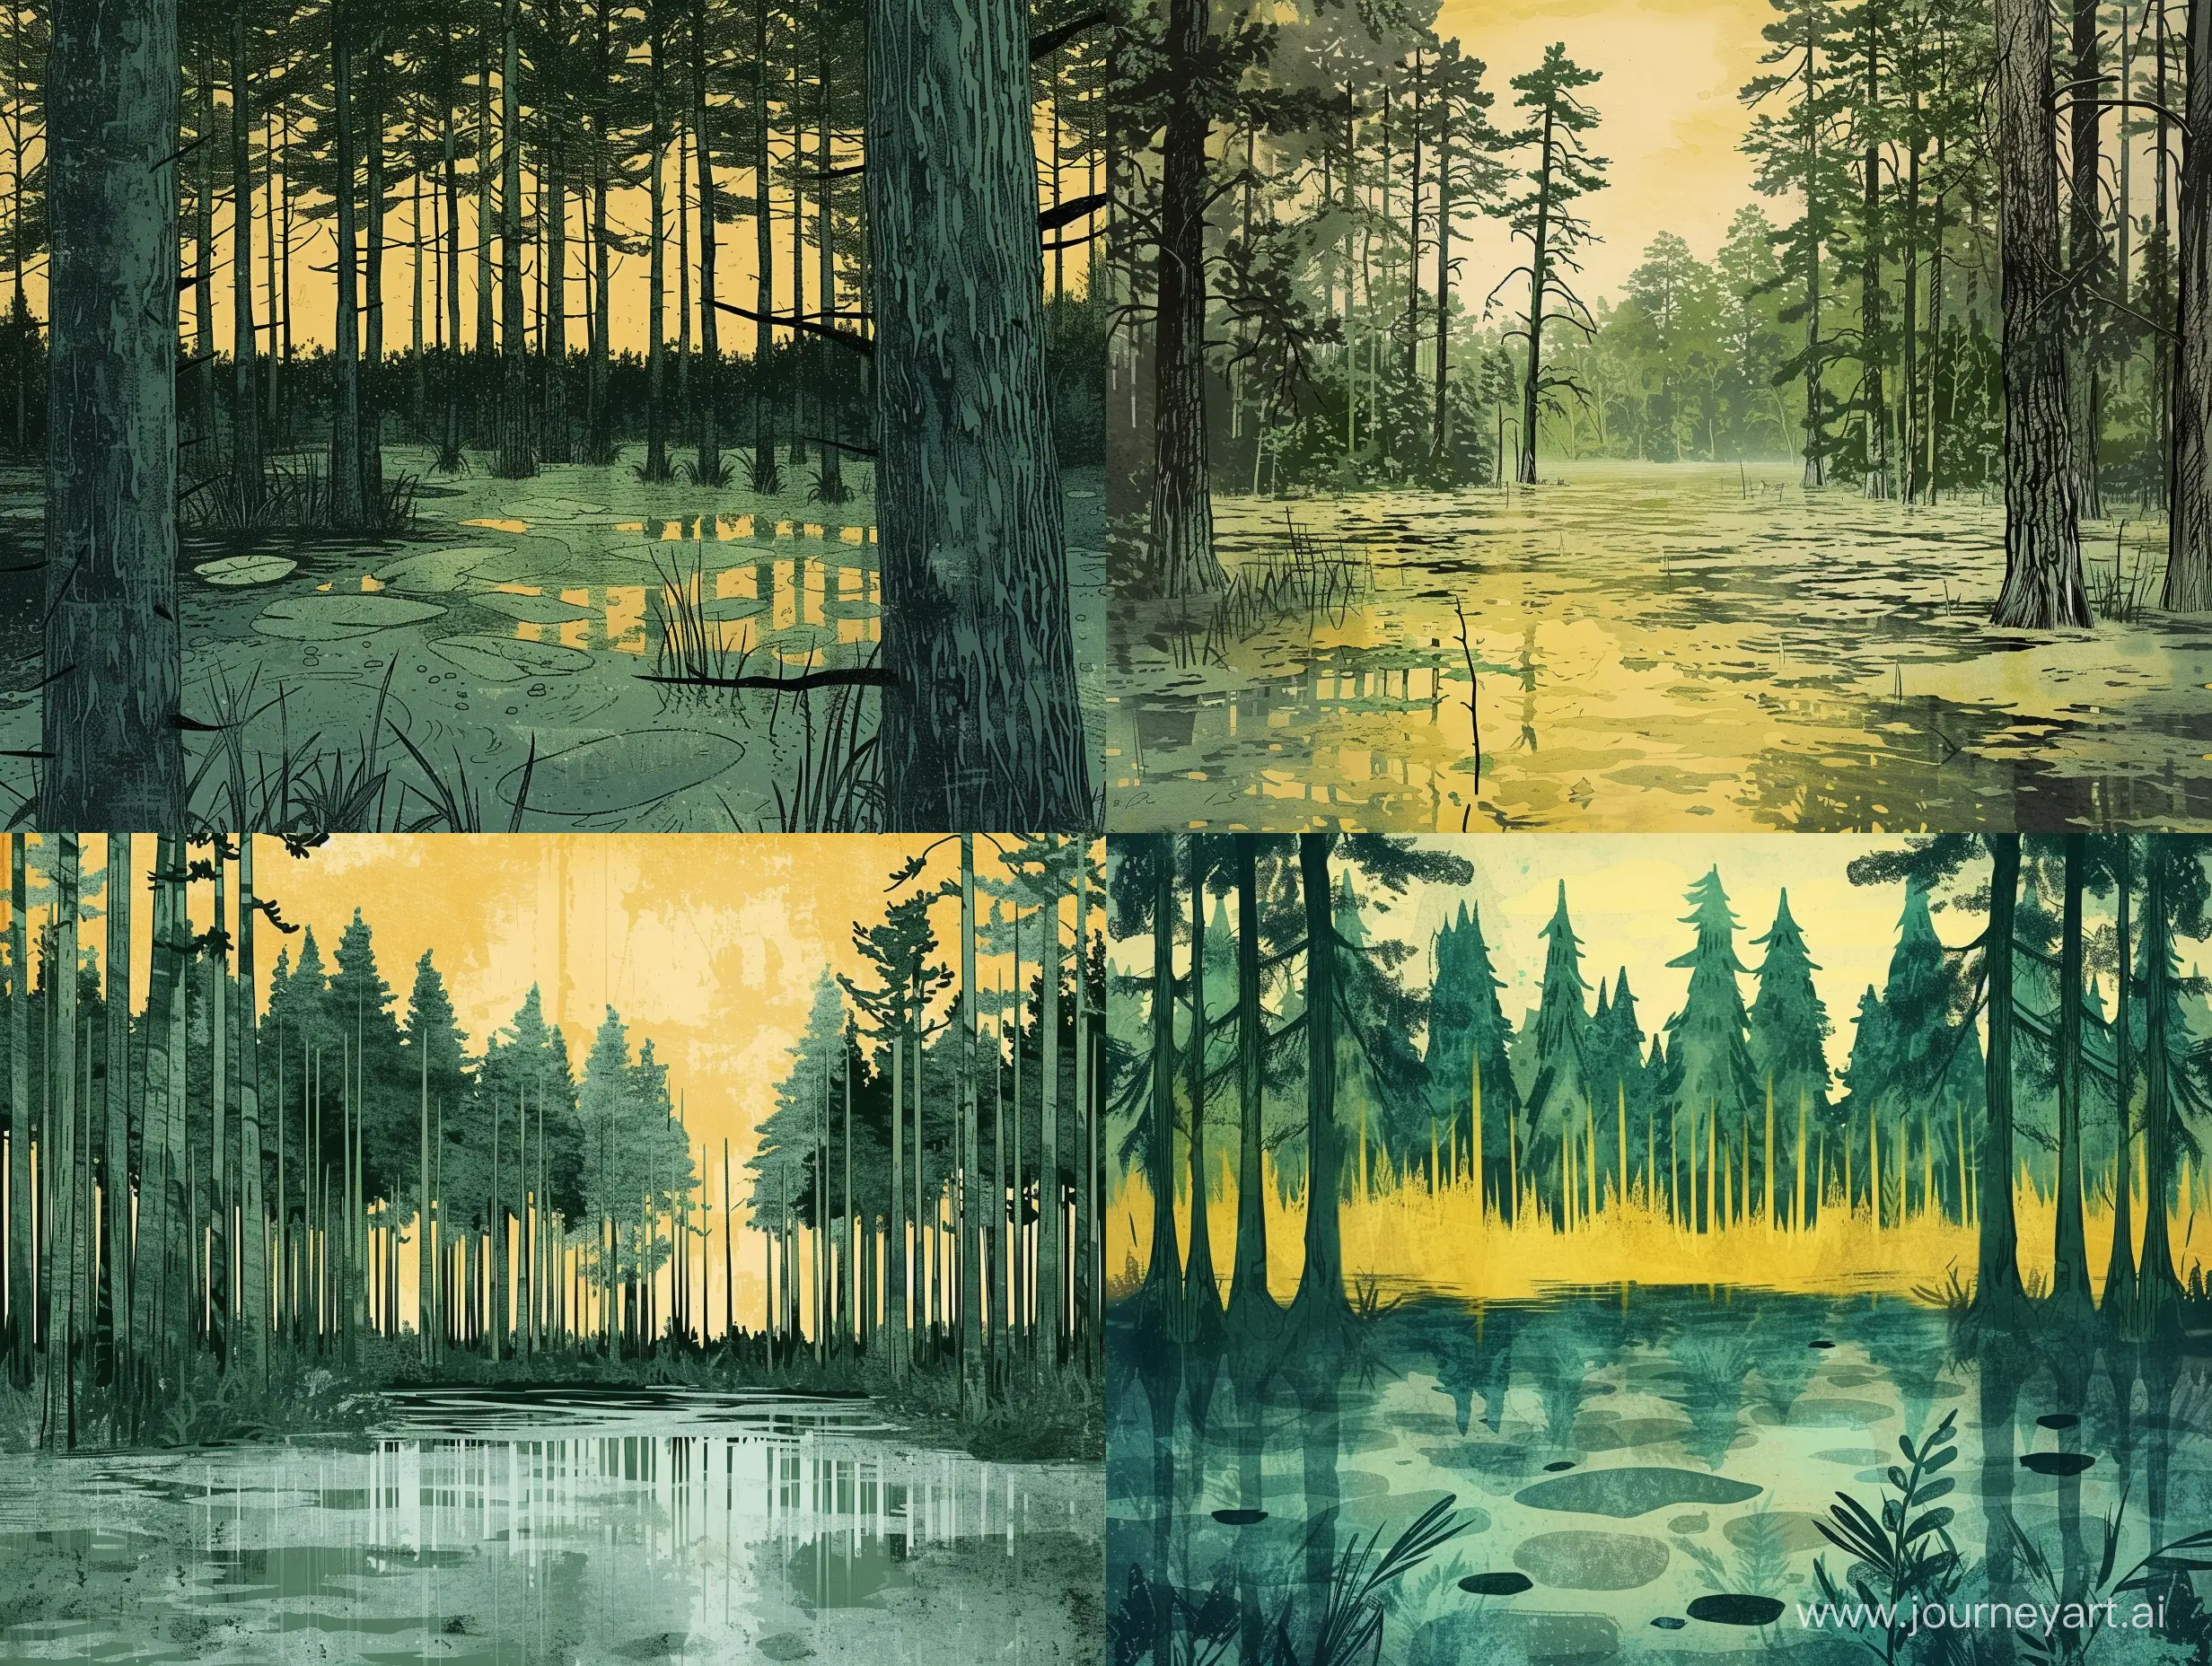 Pine forest in a swamp in the style of an old illustration in salt-dark green and yellow shades